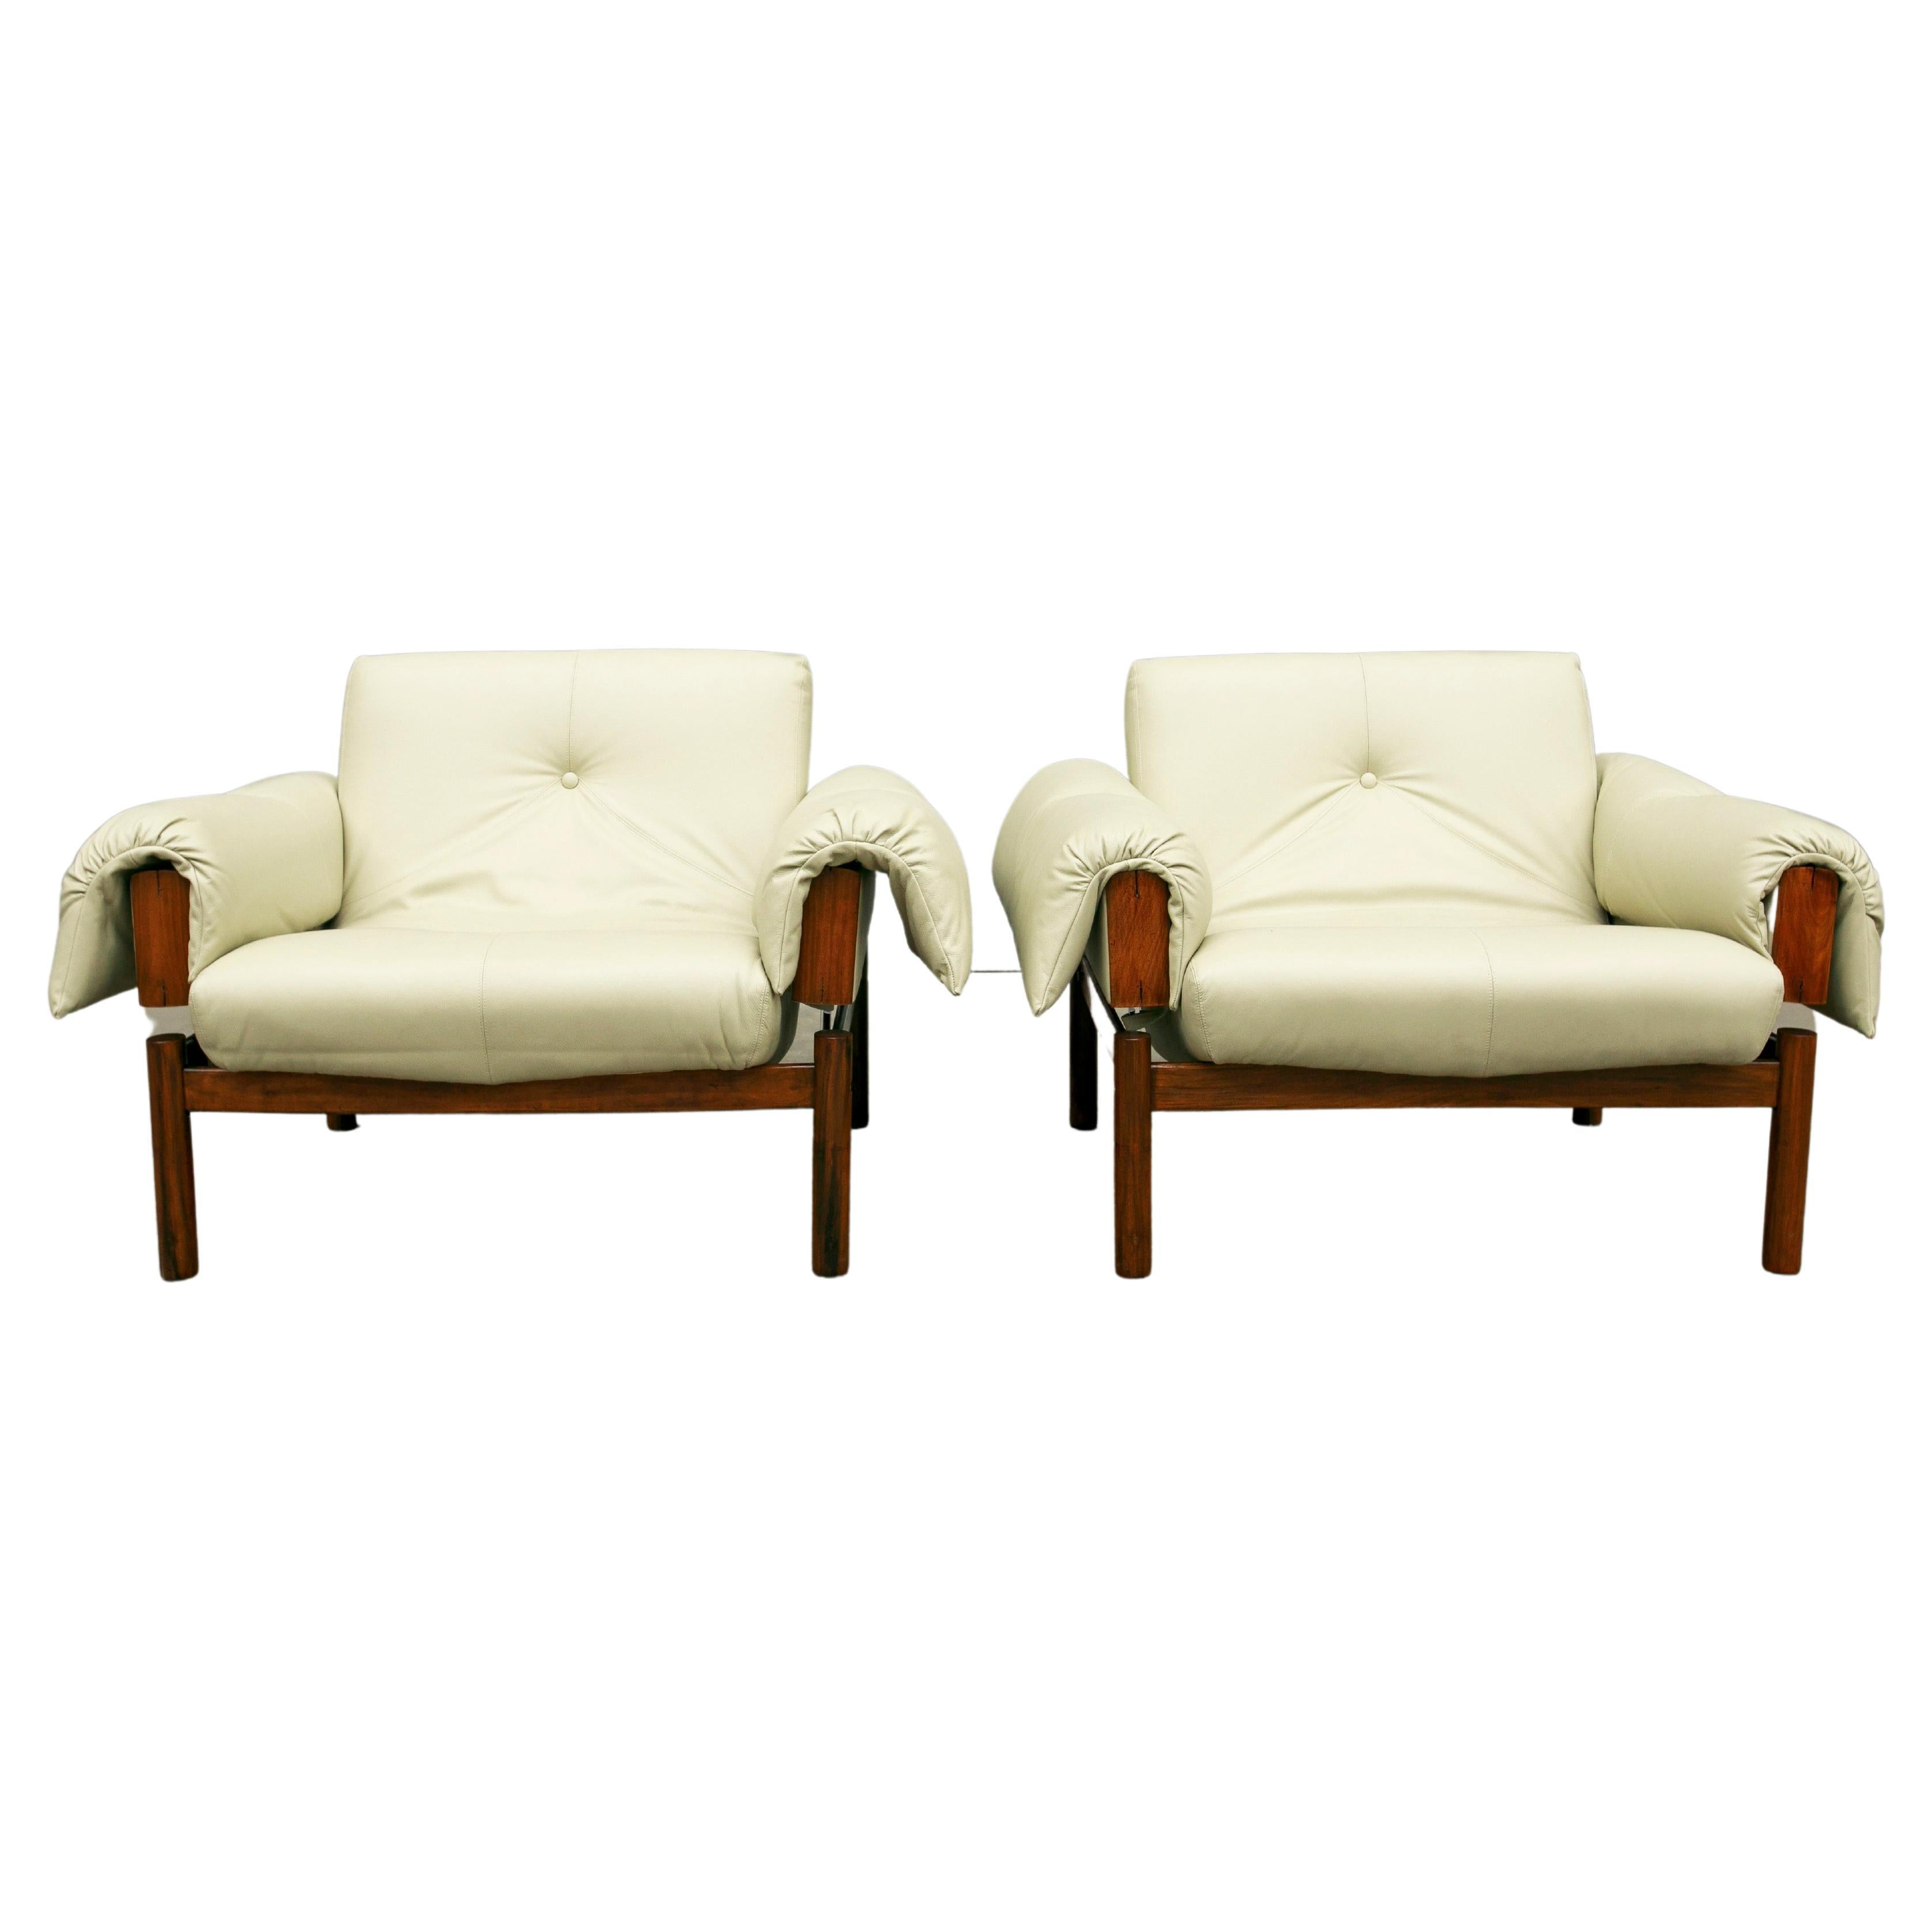 Available today, this Brazilian armchair set, model MP-13, designed by Percival Lafer in Hardwood and Beige Italian leather, 1960s is nothing less than fabulous! 

The super comfy armchairs feature a Brazilian rosewood (known as Jacaranda) base